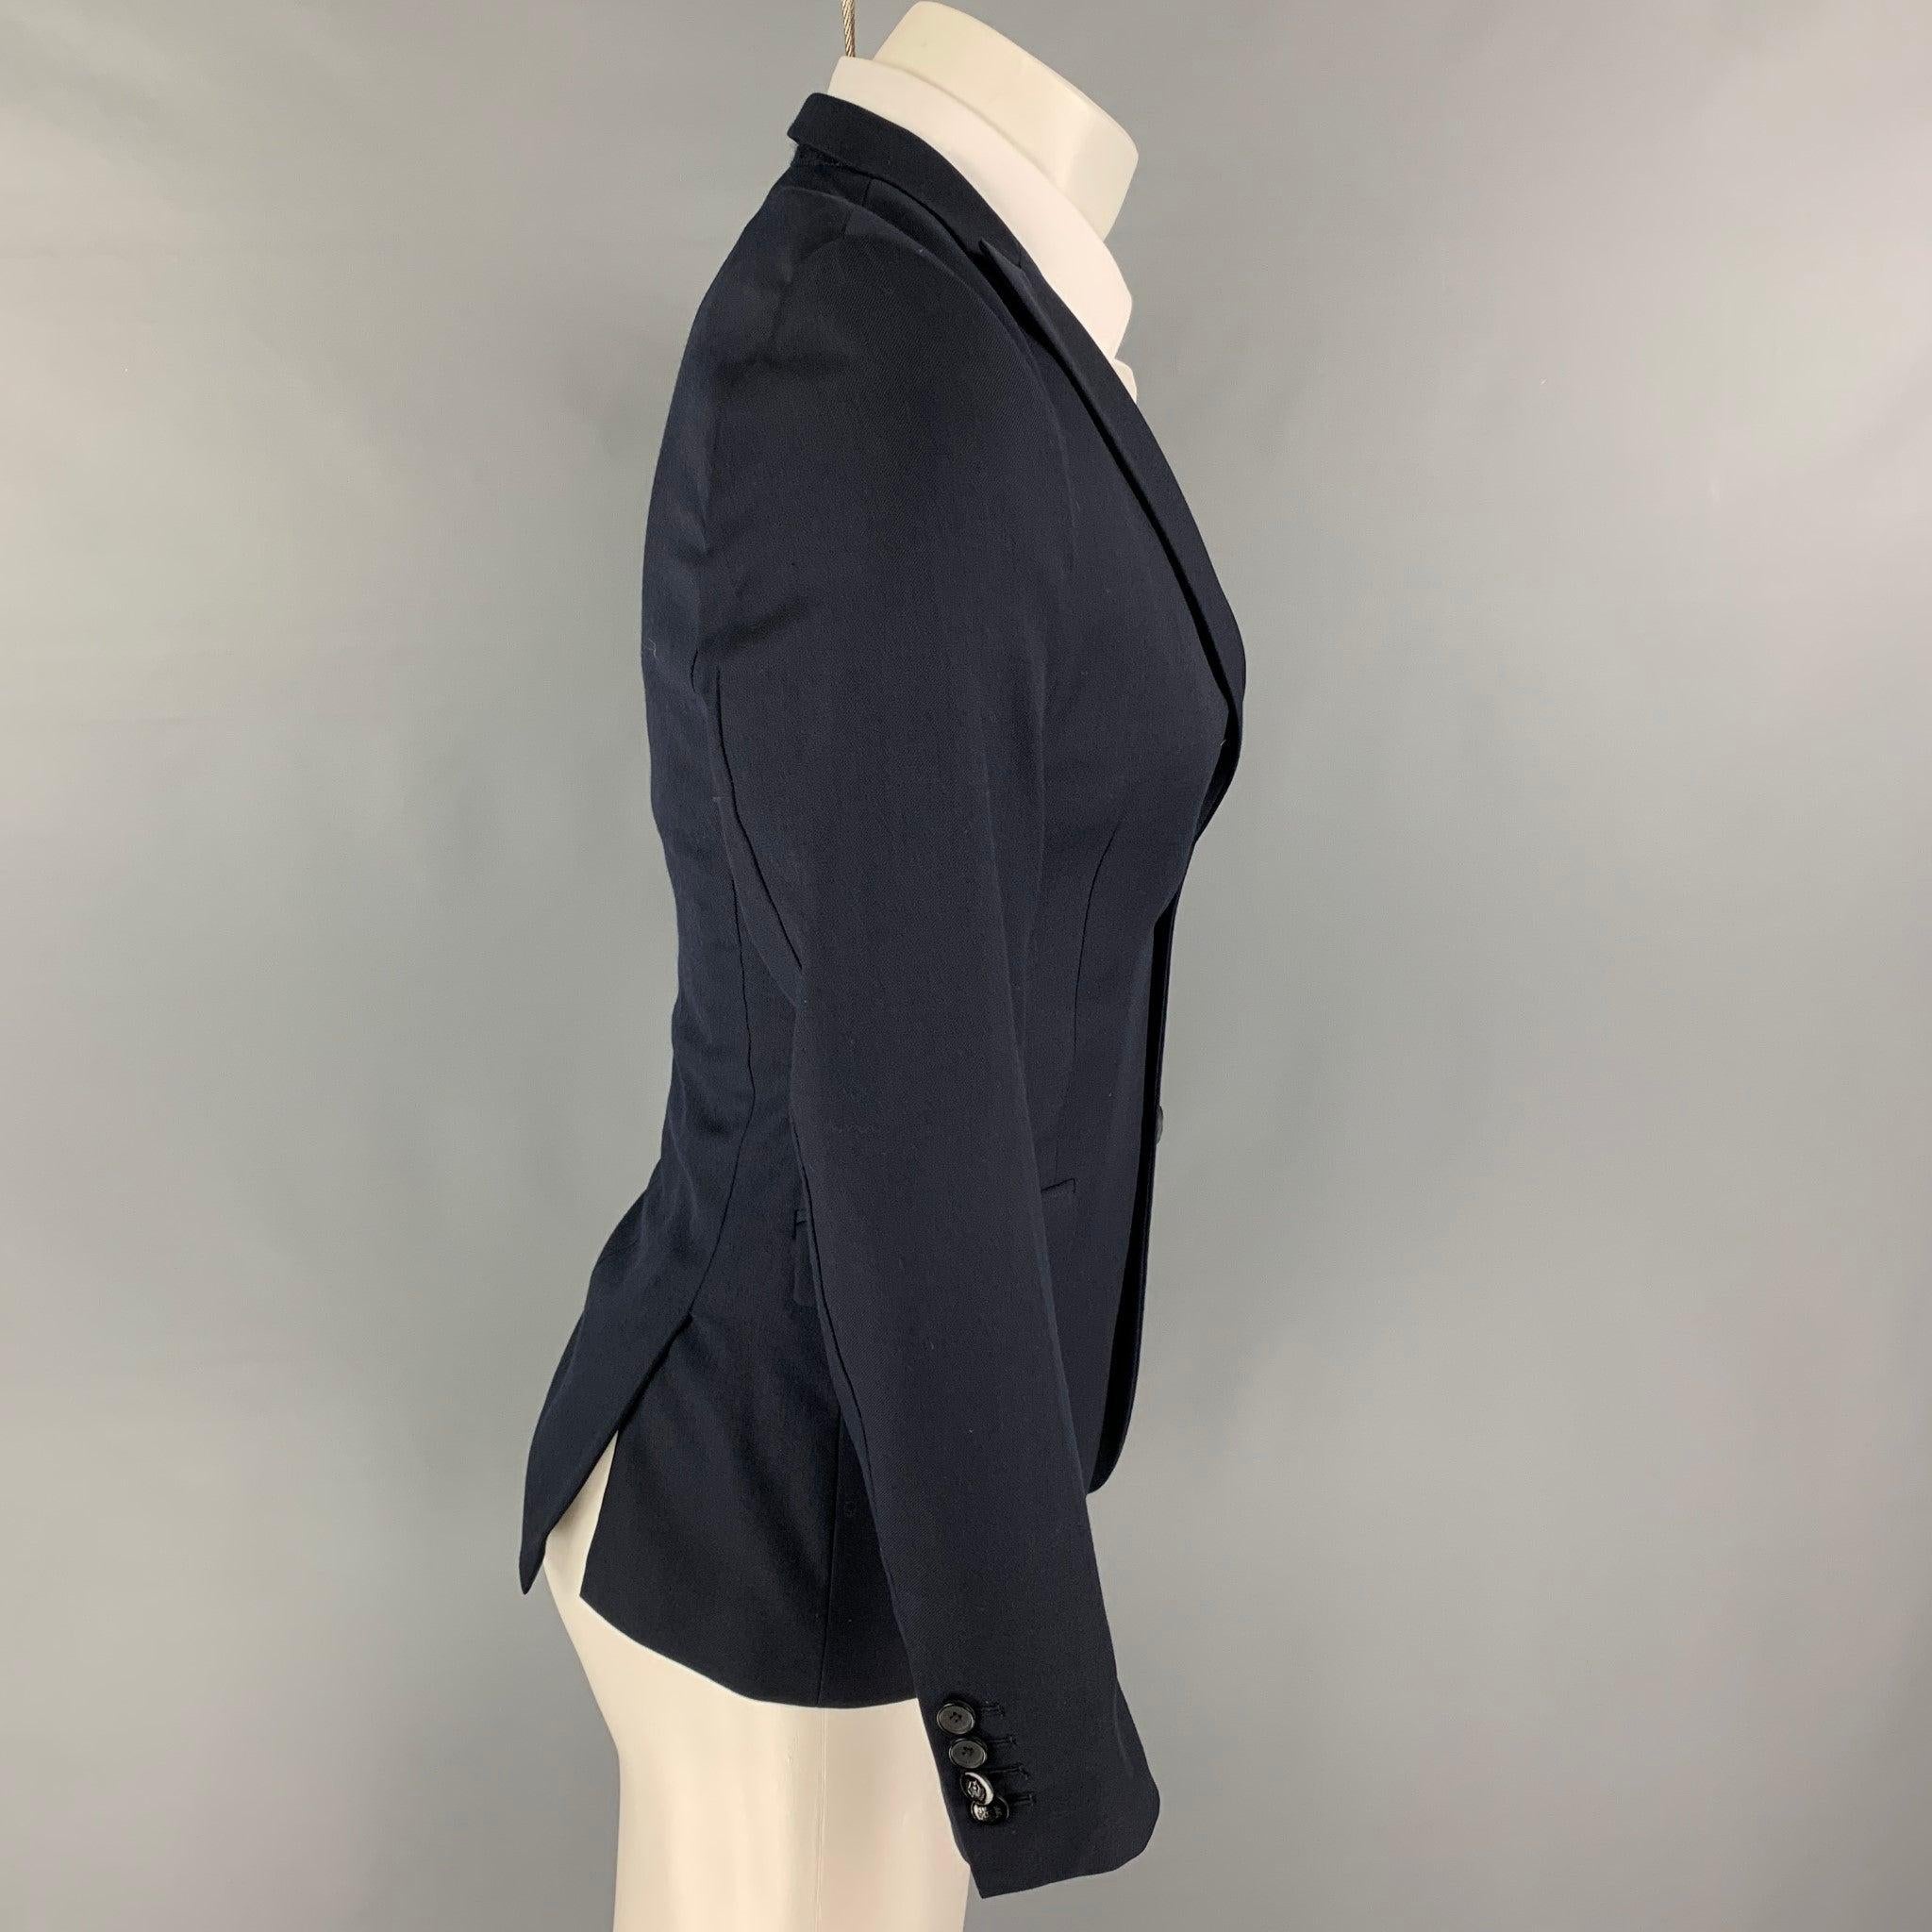 THE KOOPLES sport coat comes in a navy wool with a full liner featuring a peal lapel, flap pockets, double back vent, and a double button closure. Excellent
Pre-Owned Condition. 

Marked:   46 

Measurements: 
 
Shoulder: 16.5 inches Chest: 36